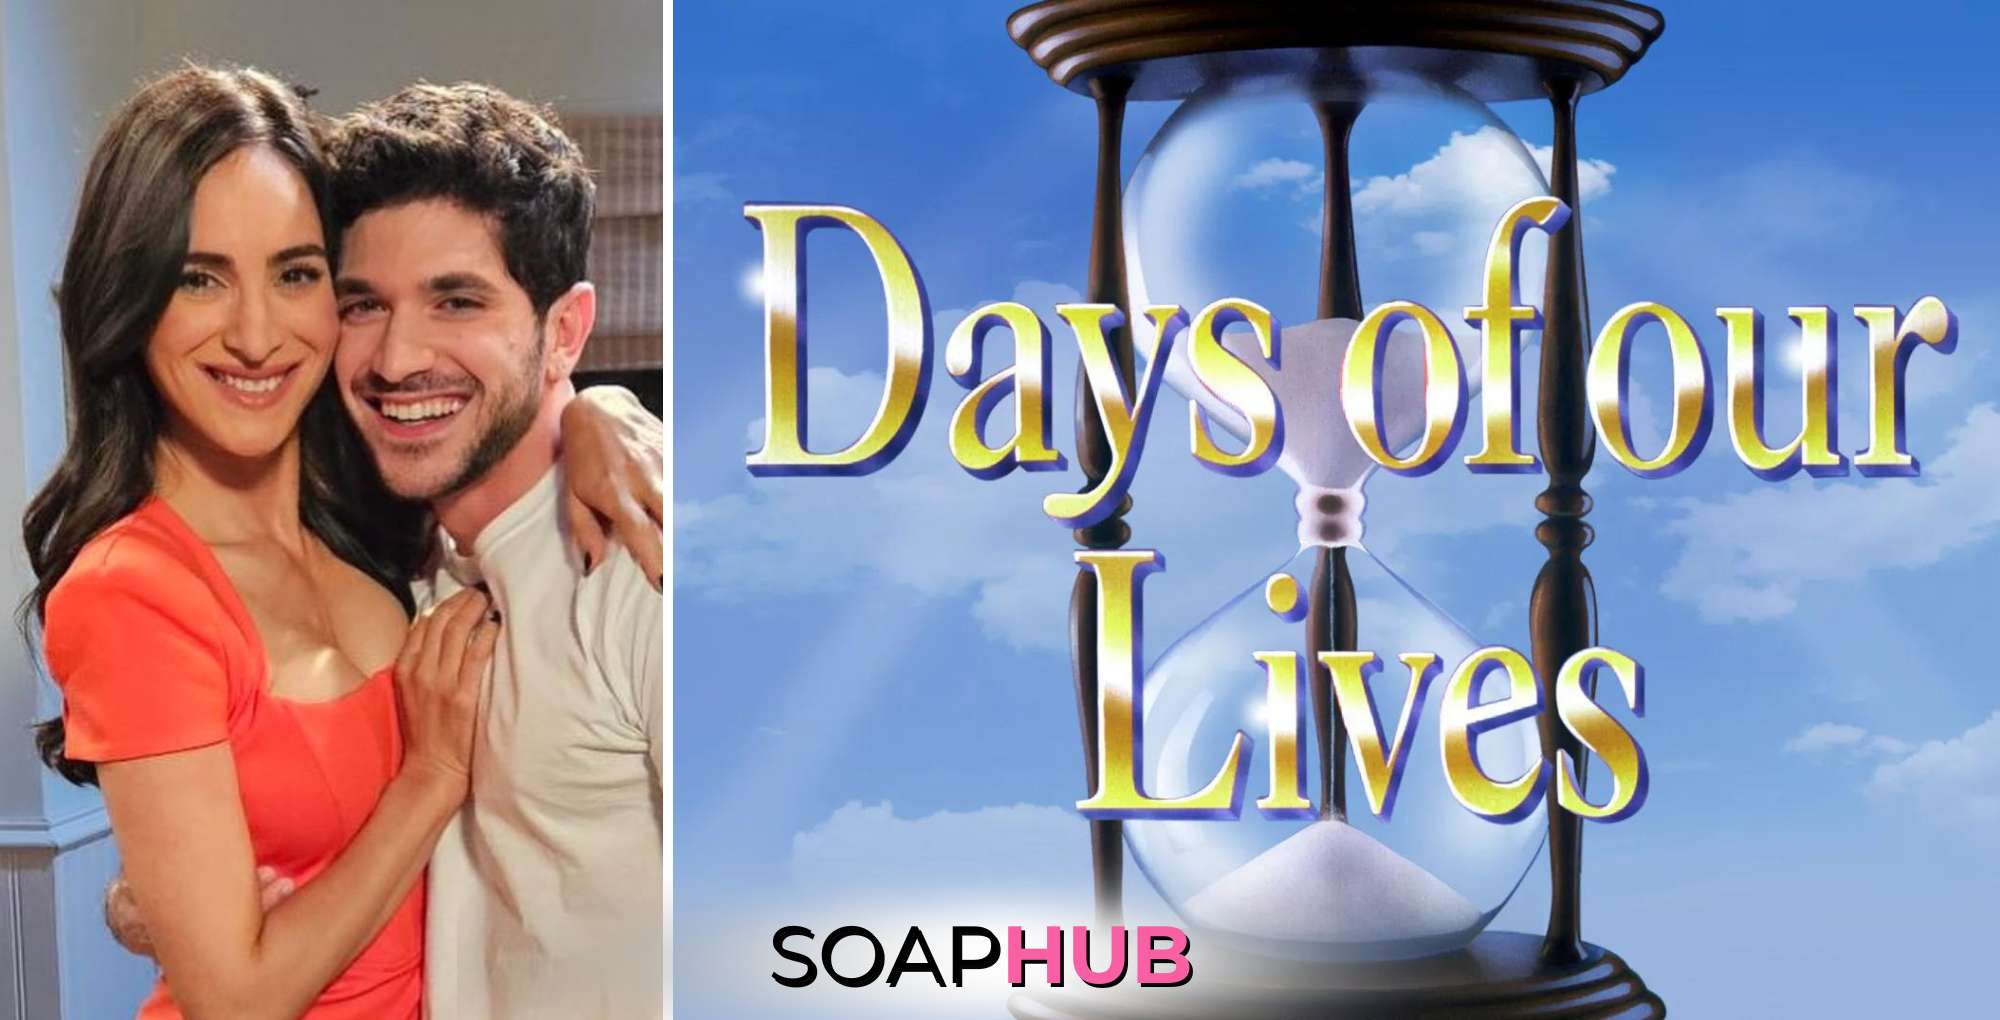 Cherie Jimenez and Al Calderon with the Days of our Lives keyart and the Soap Hub logo across the bottom.